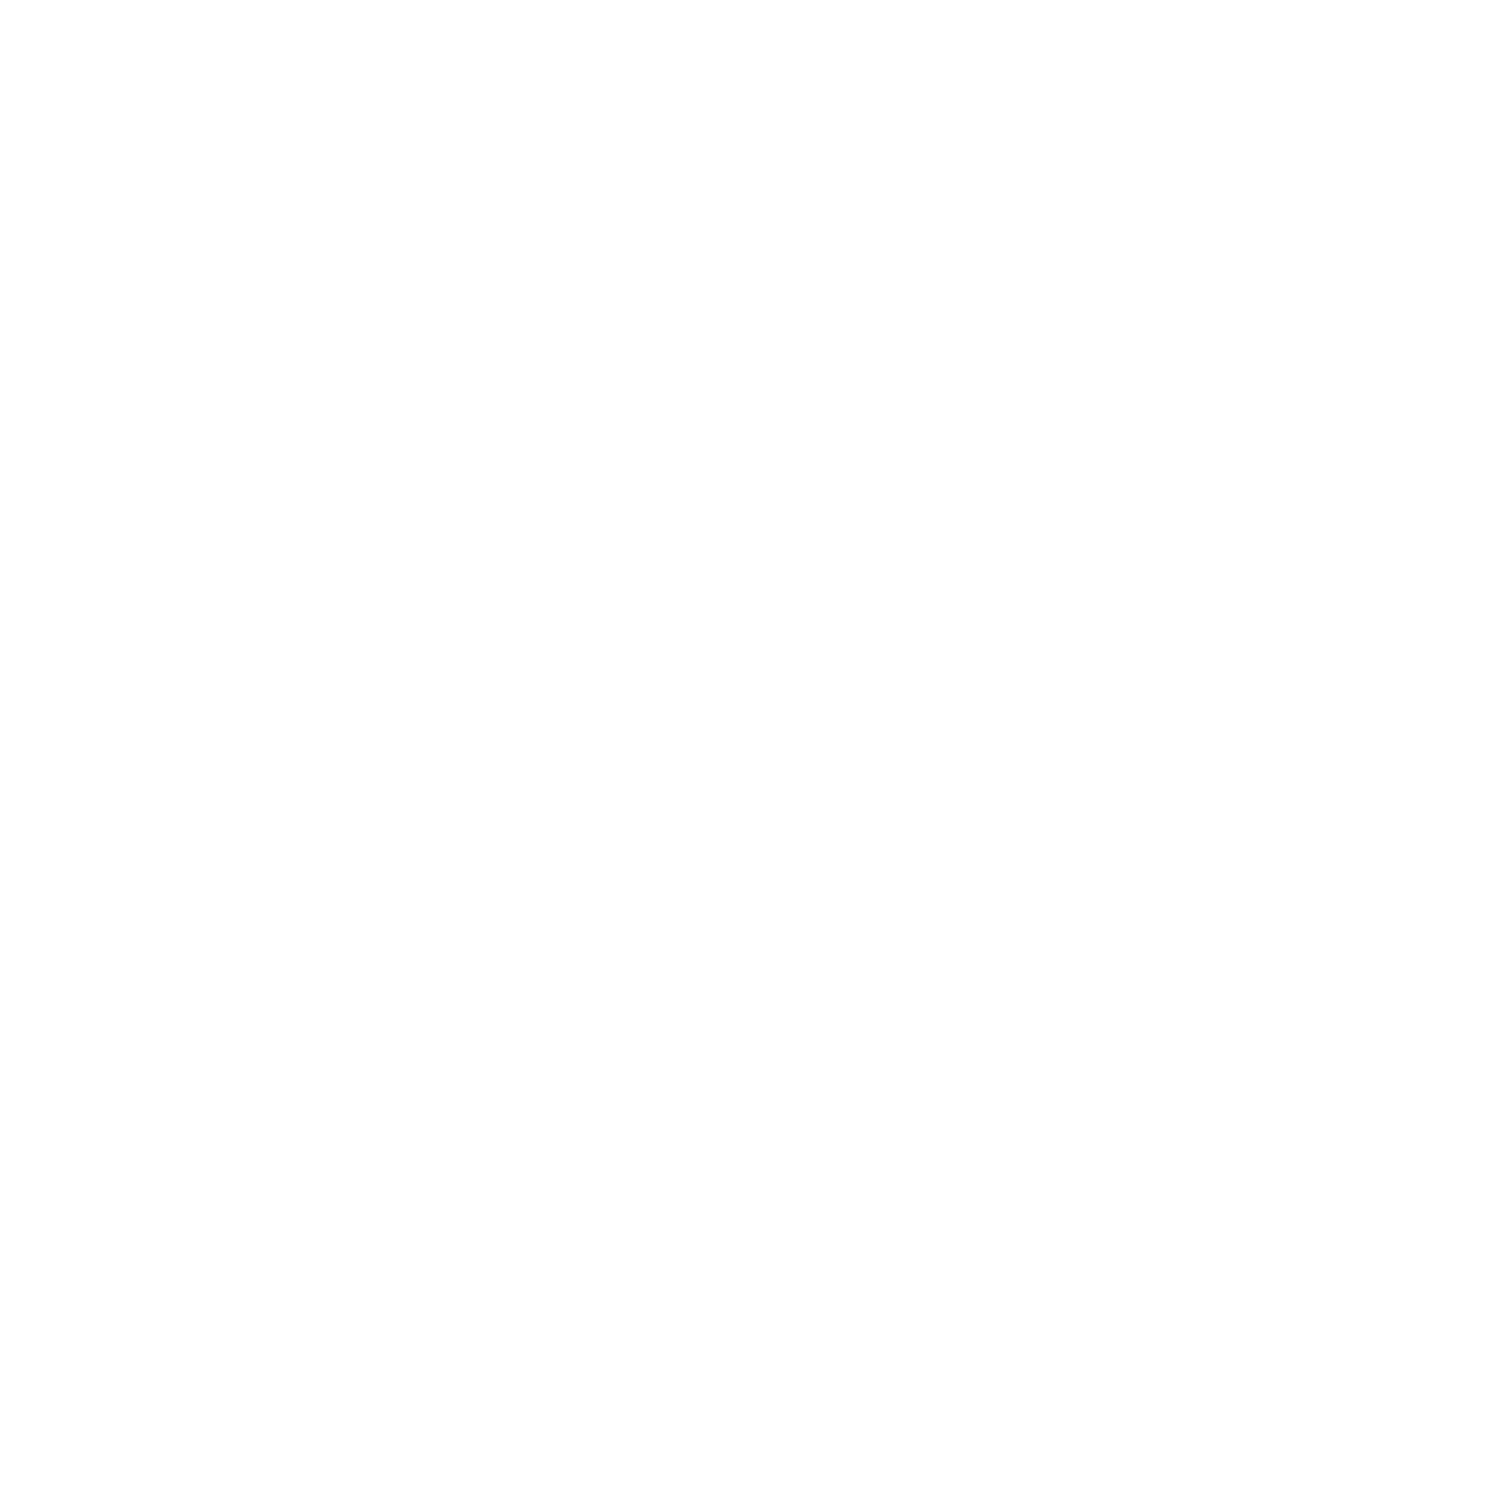 Victoria Beddoes Photography